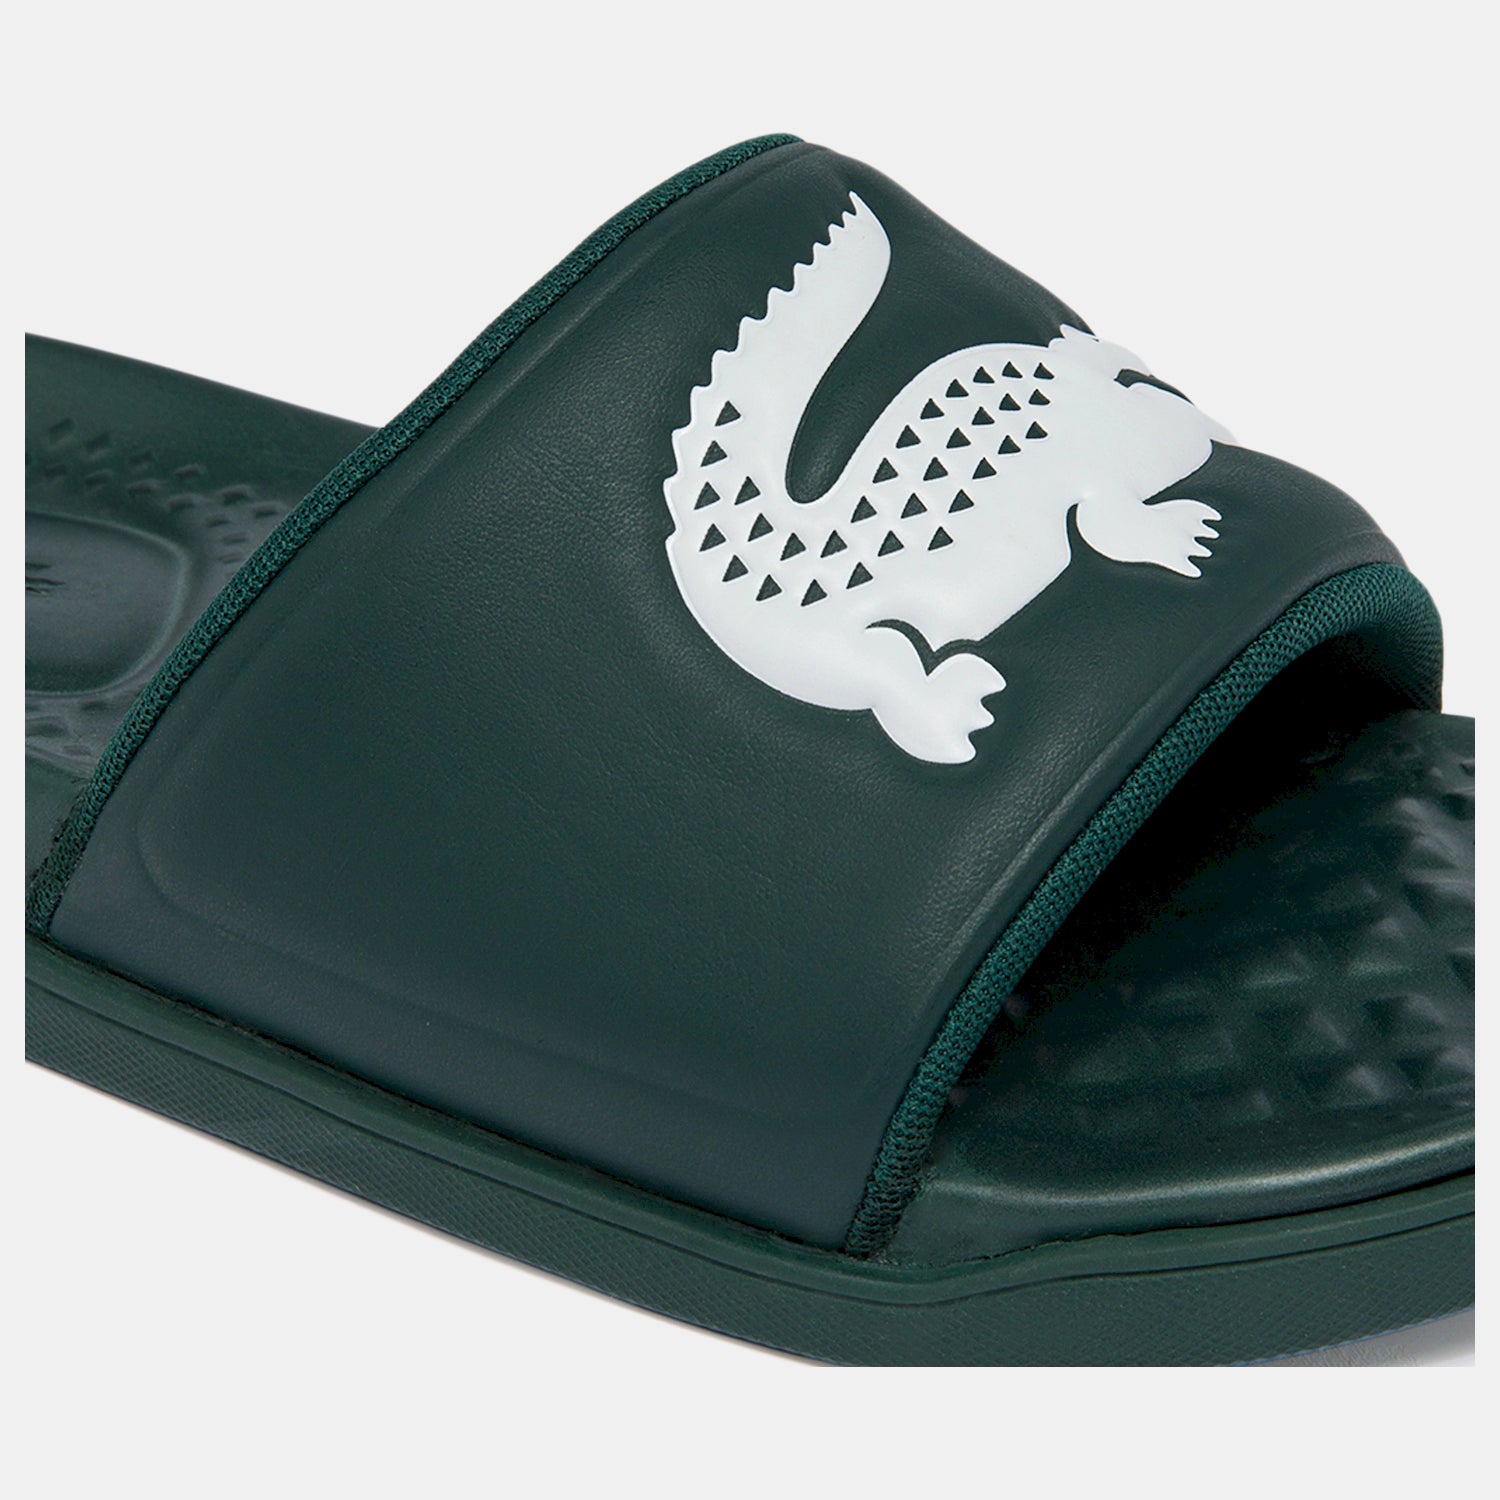 Lacoste Chinelos Slippers Croco Dualiste Green Whit Verde Branco_shot6